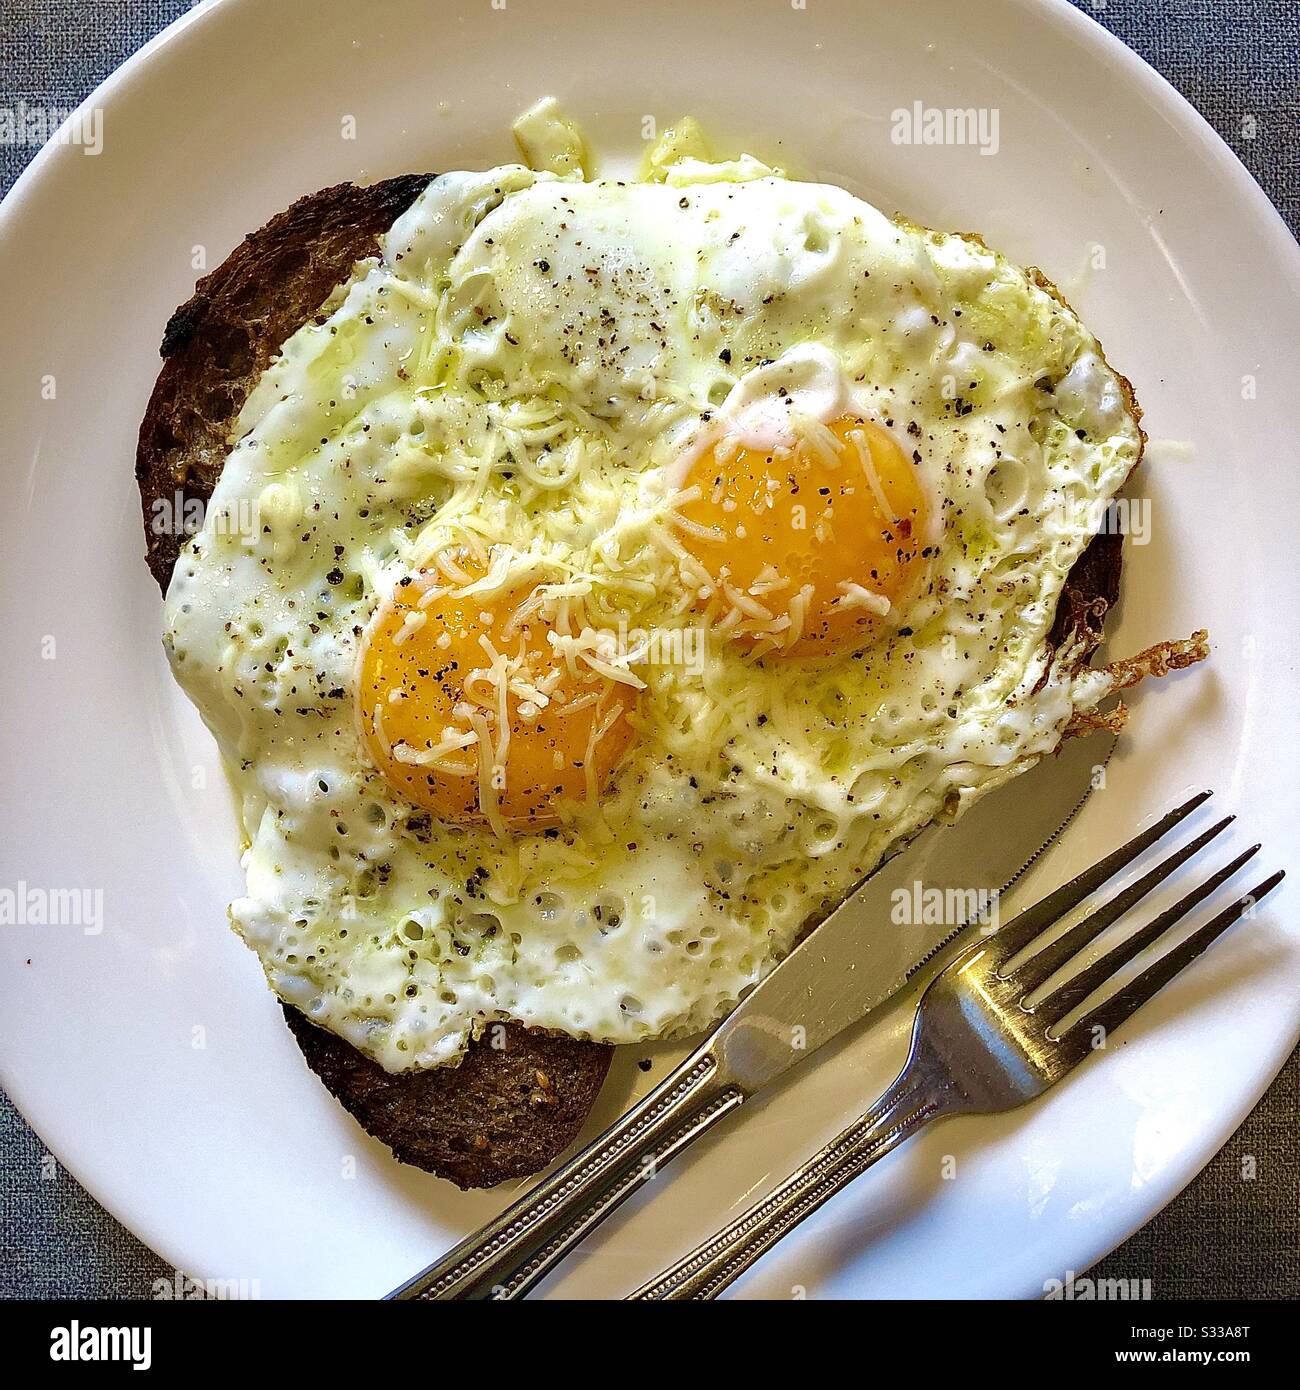 Fried eggs on fried bread snack. Stock Photo